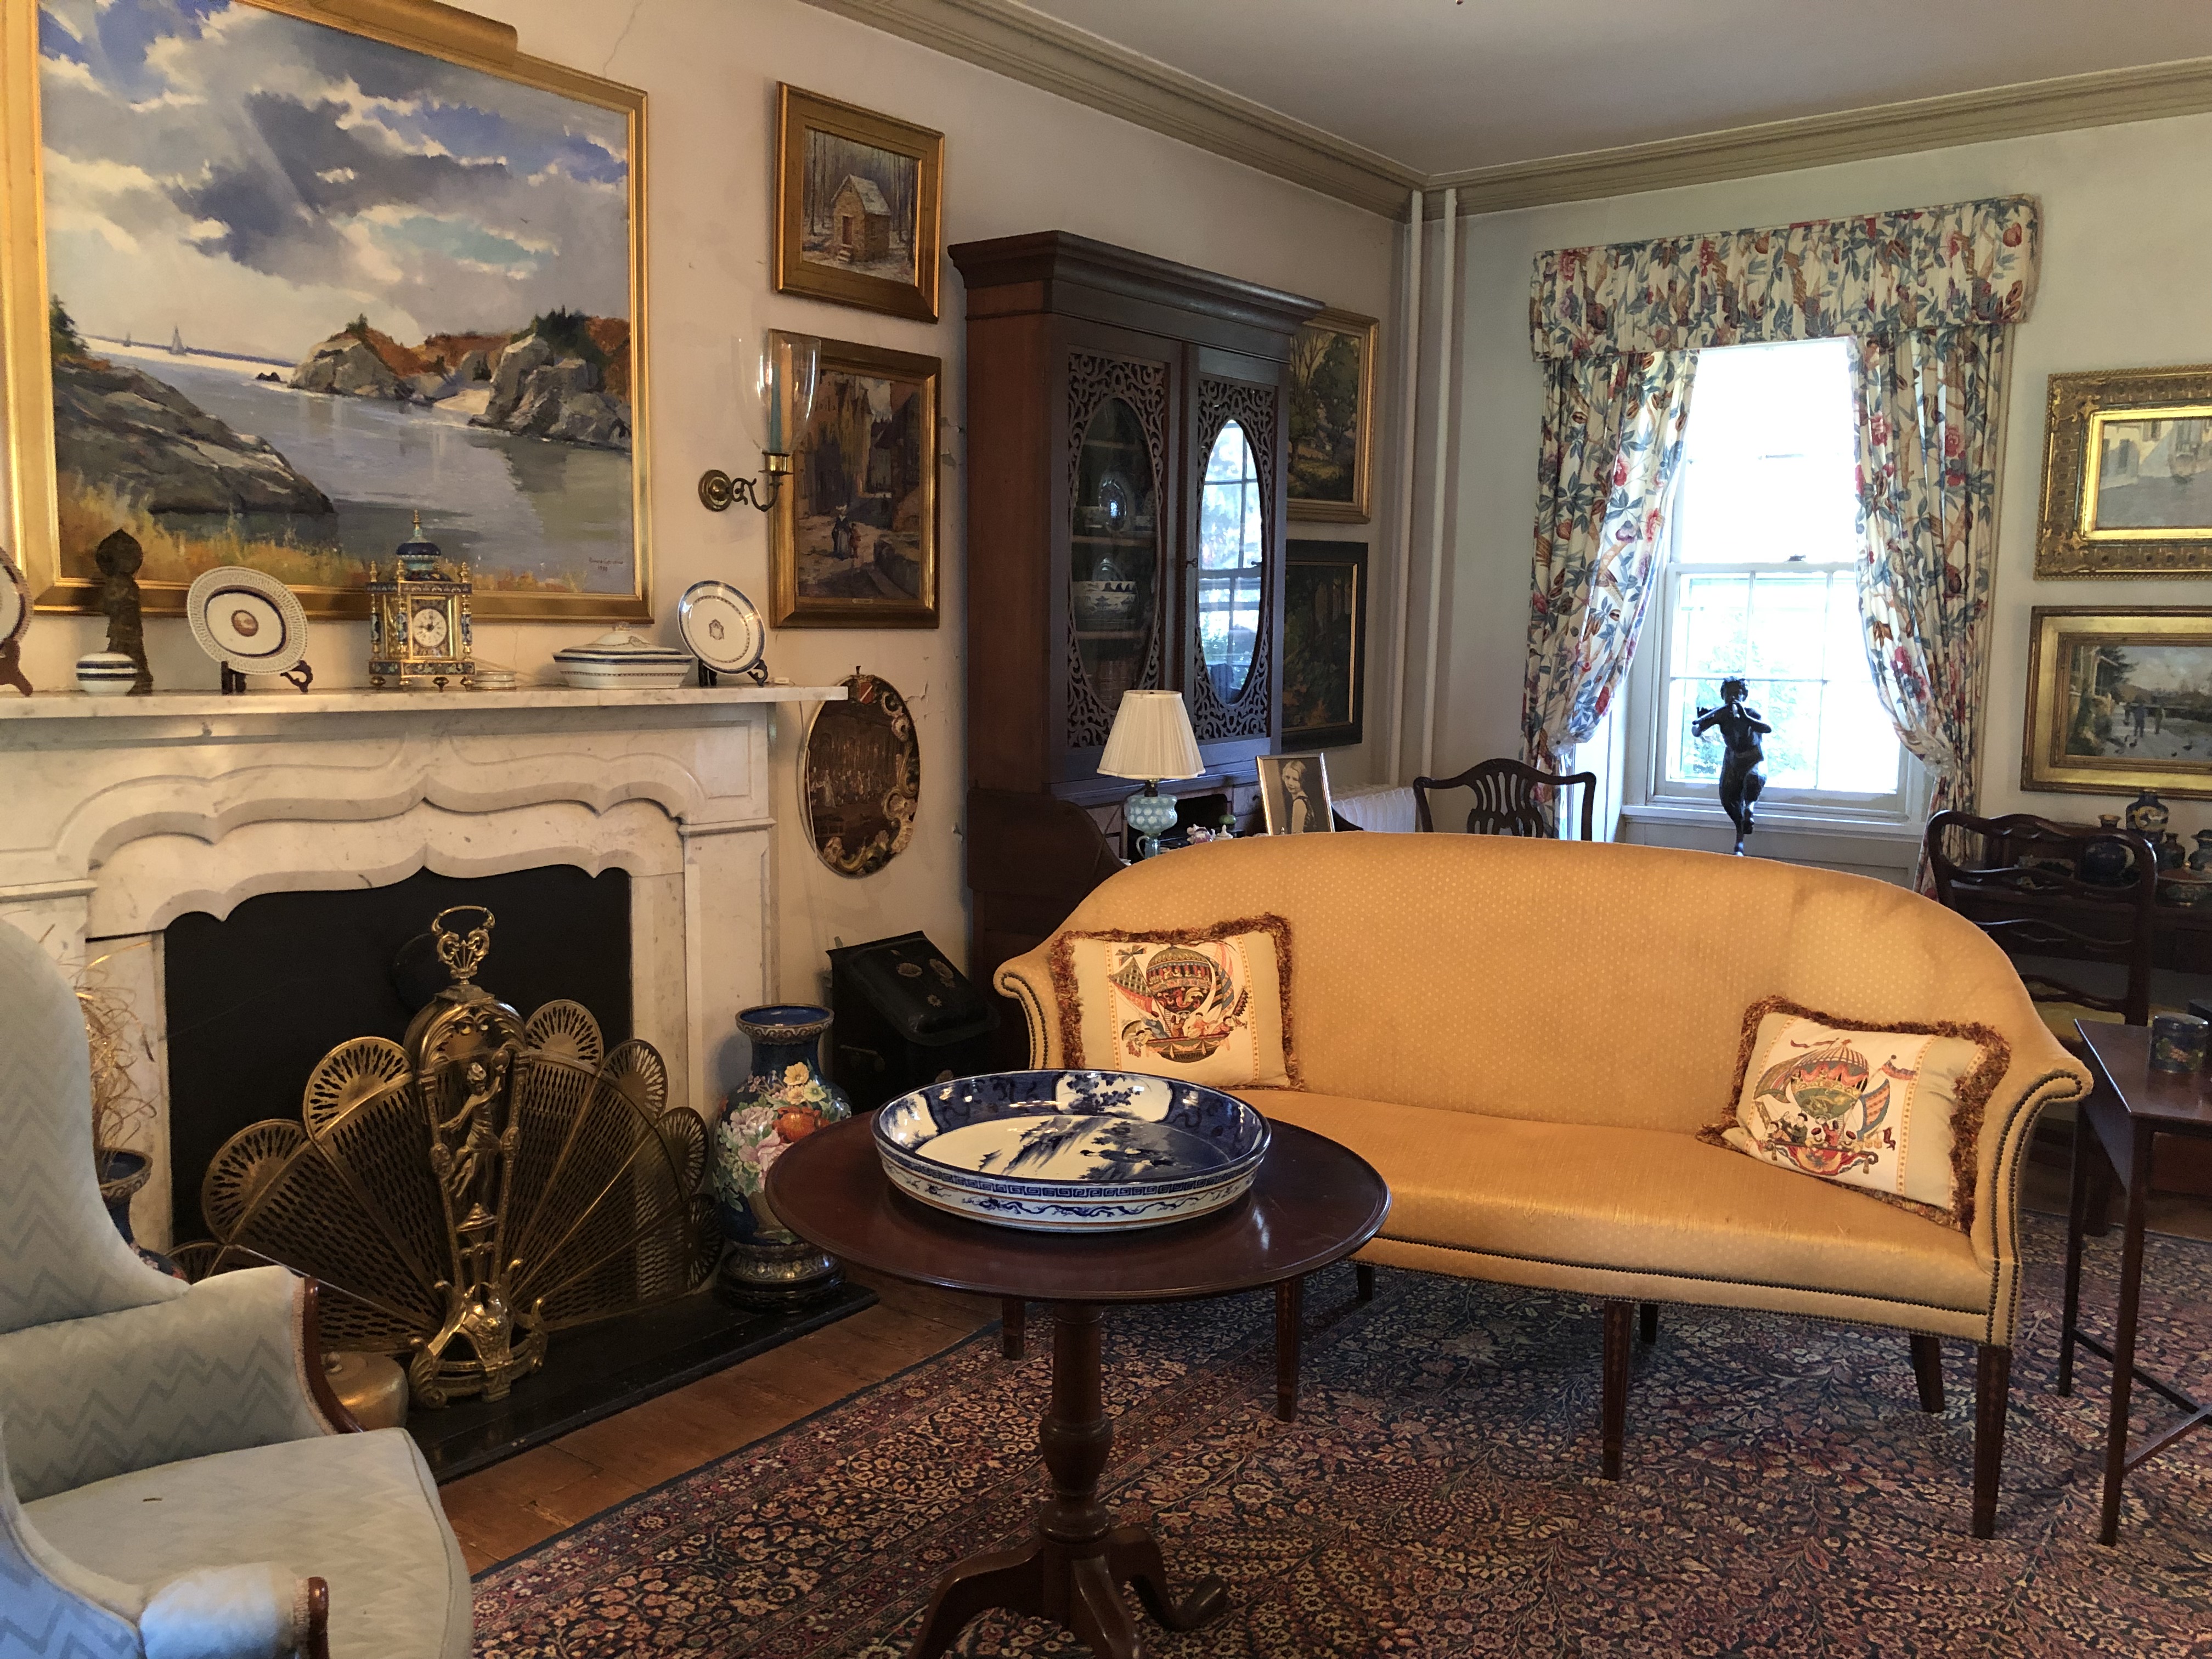 The house is furnished with antiques and artworks throughout, even in necessary workaday spaces like the kitchen. Visitors often comment that the place looks like a museum. I started collecting while I was still at Wabash, and Lura enthusiastically shares my interest. 